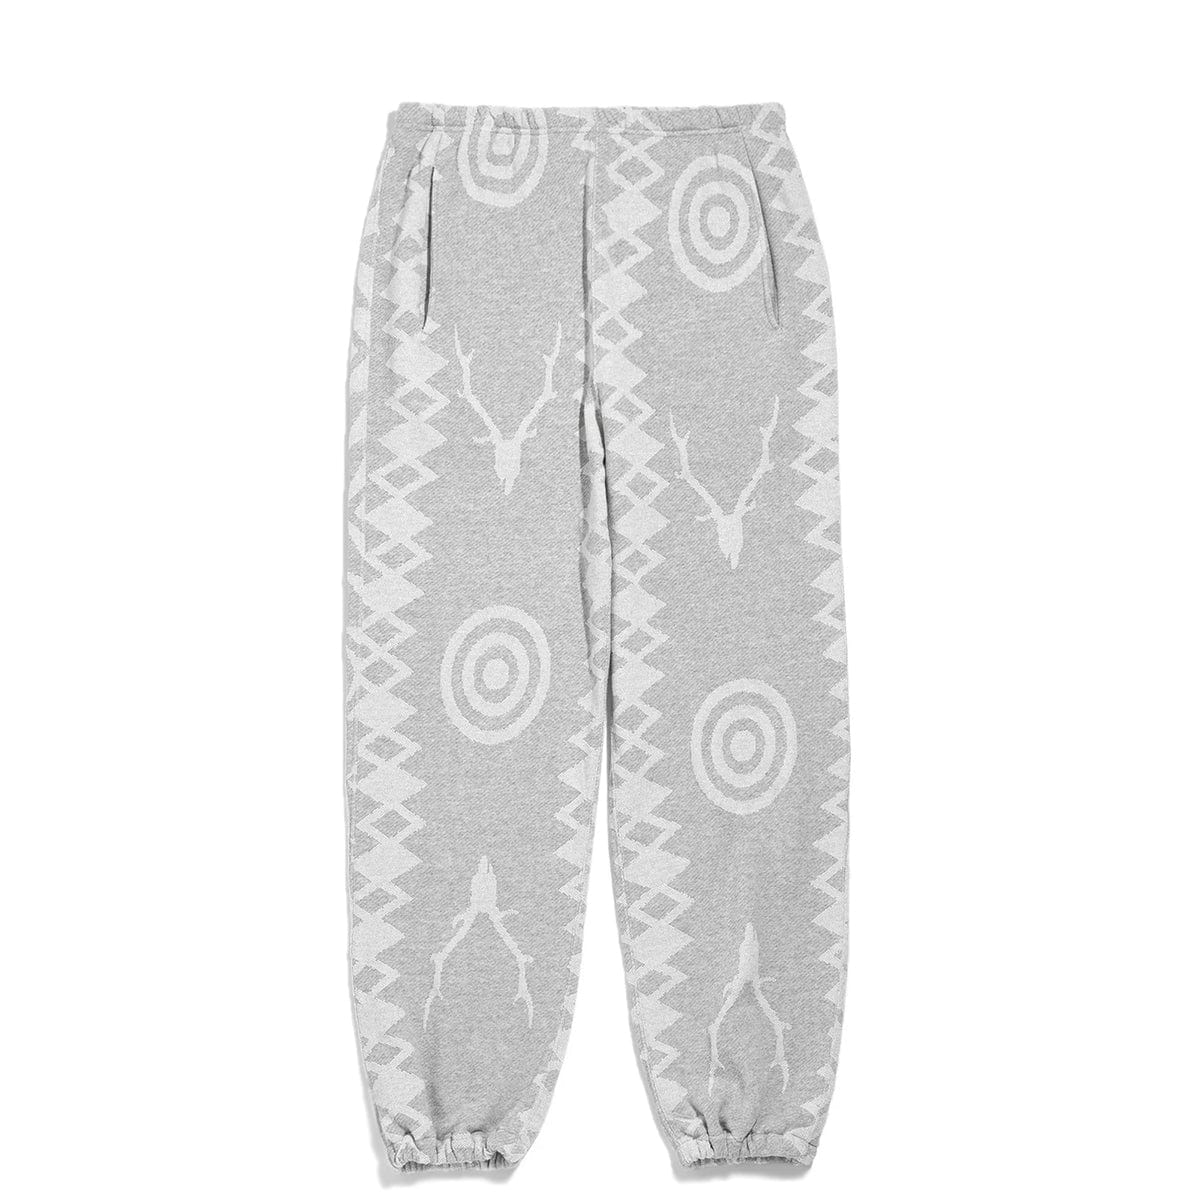 South2 West8 Bottoms STRING SWEAT PANT